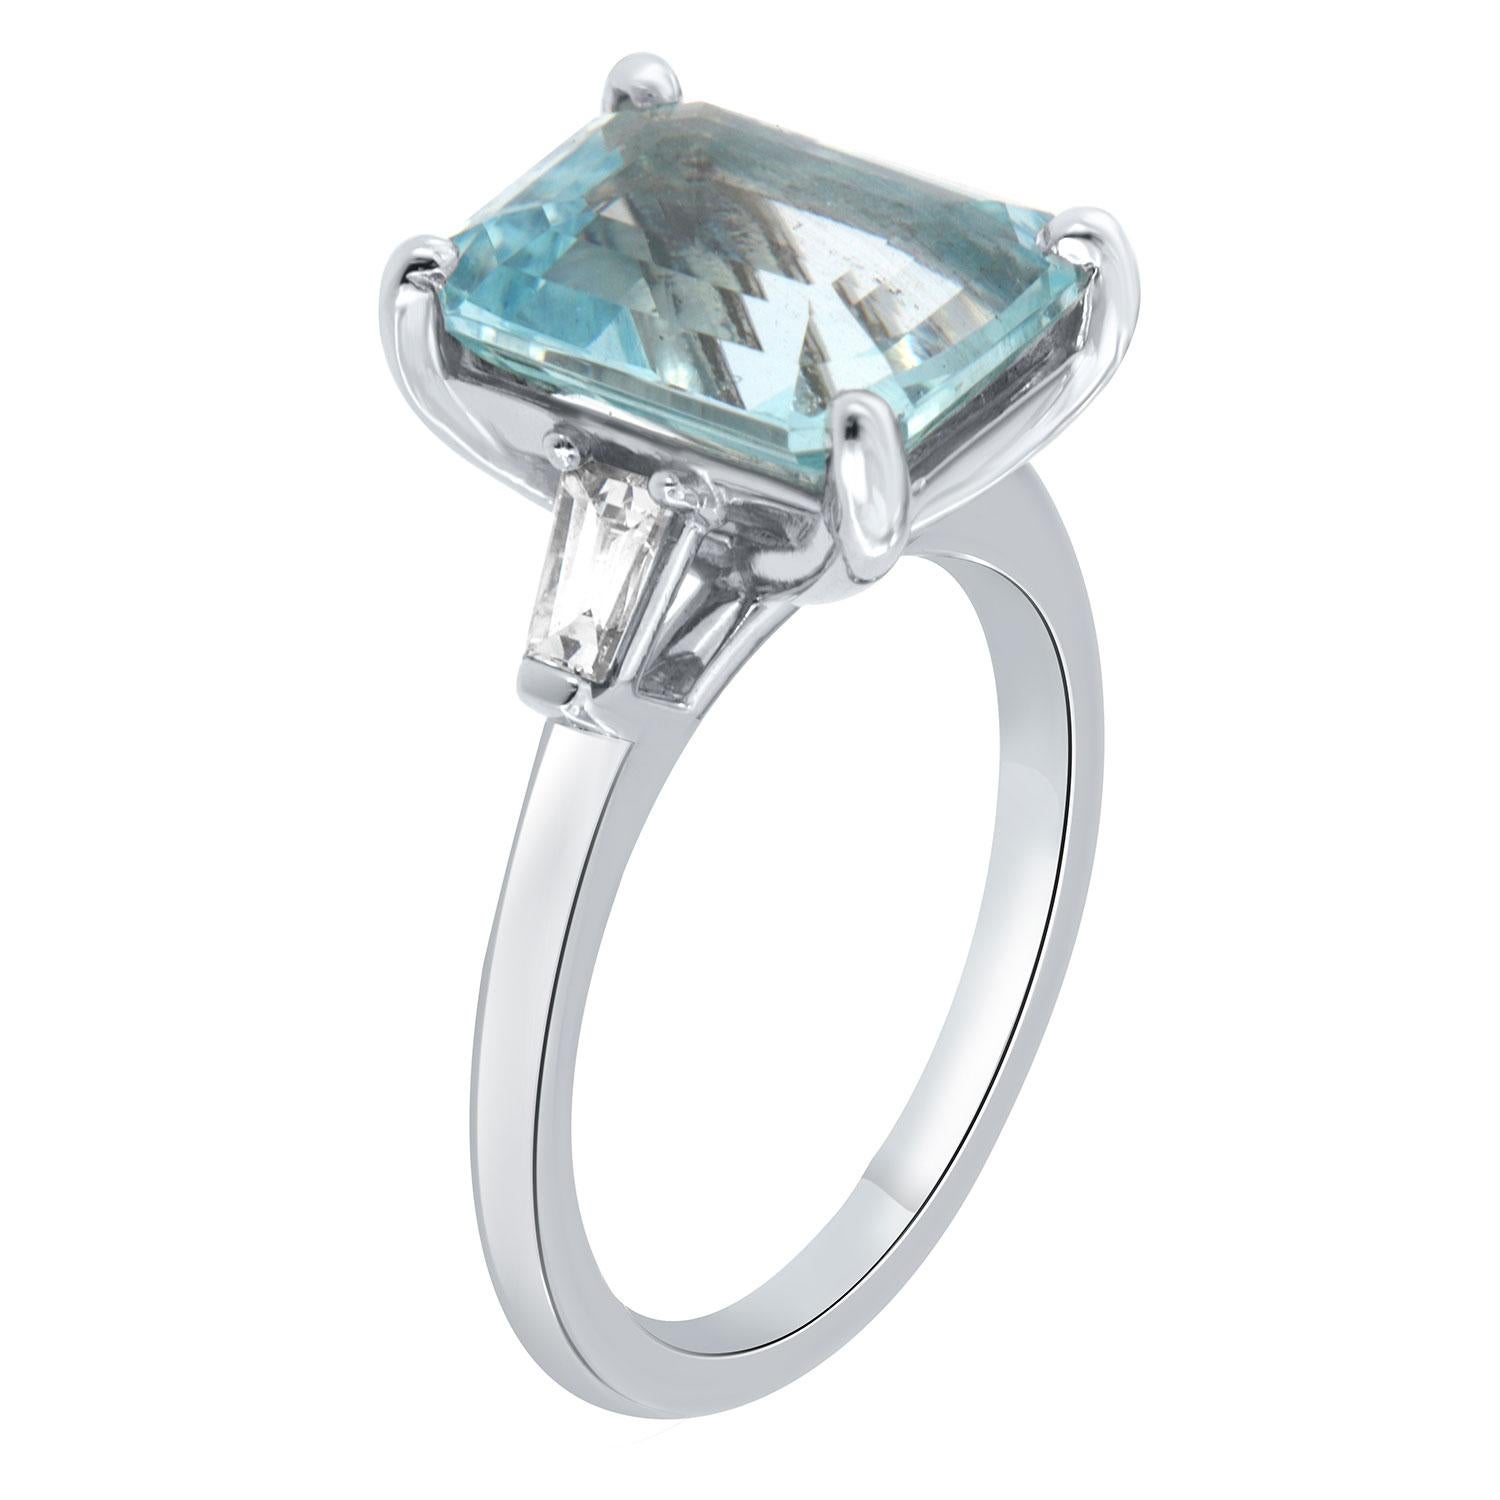 This timeless Three-Stone platinum ring features a 3.73- Carat Sky Blue Color Emerald -Shaped Aquamarine flanked by two Tapered Baguette diamonds ideally situated to enhance the brilliance of the Aquamarine. The total weight of the Tapered Baguette